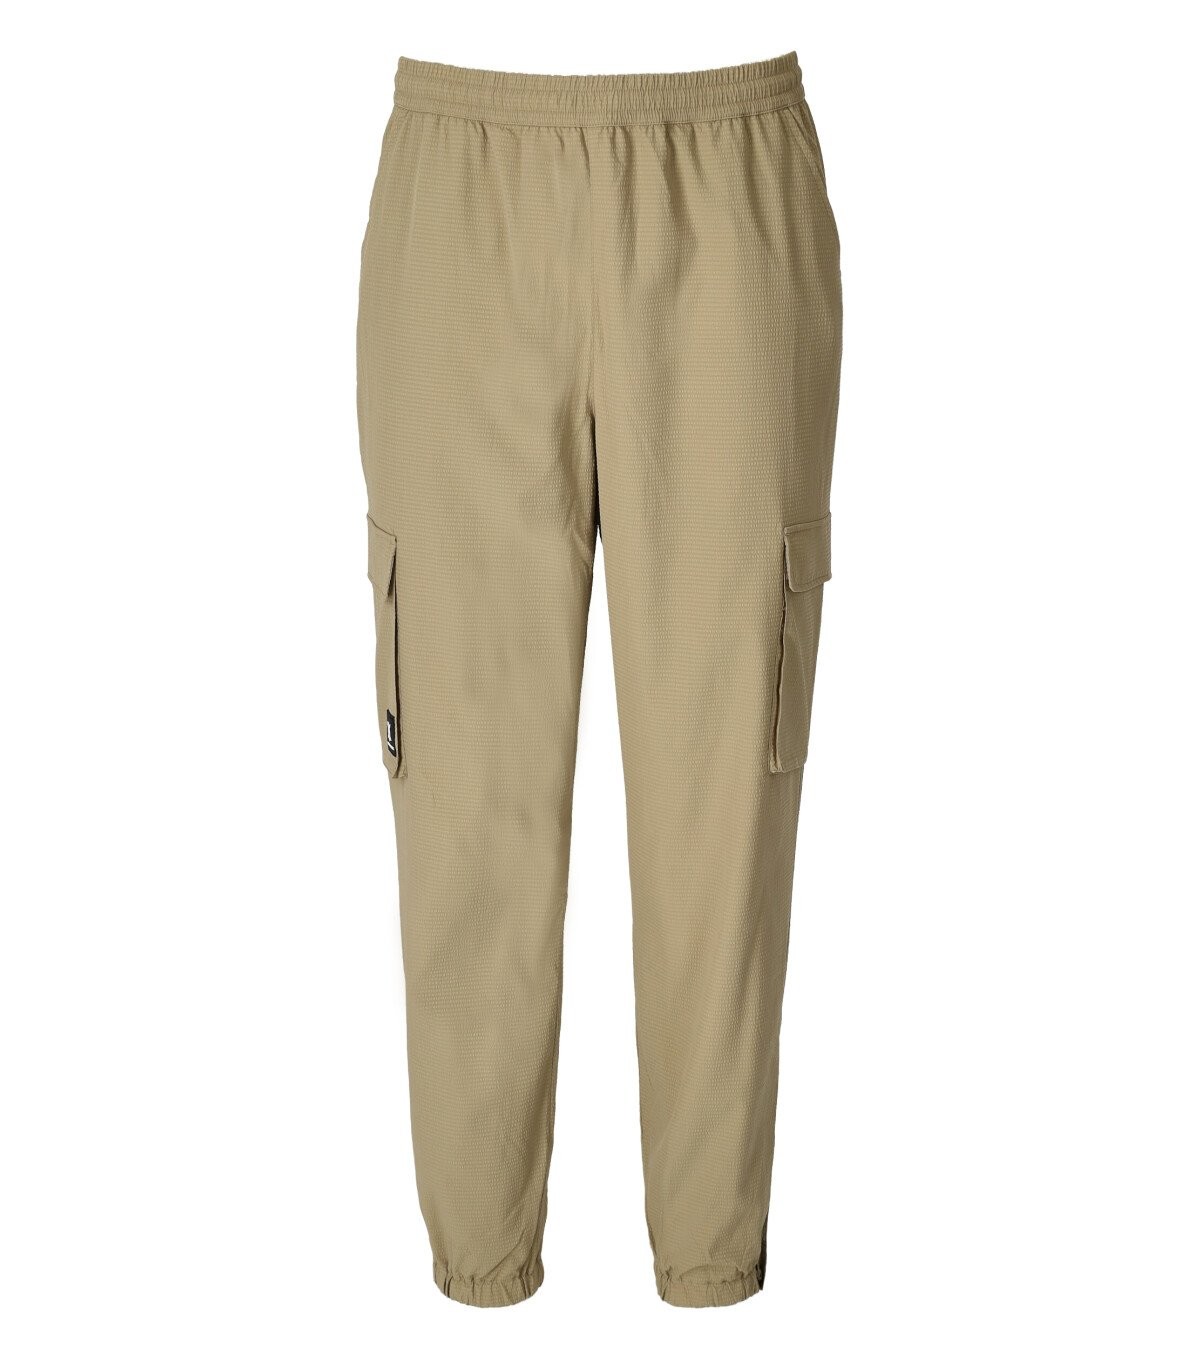 DAILY PAPER PEYISAI BEIGE TRACK PANTS